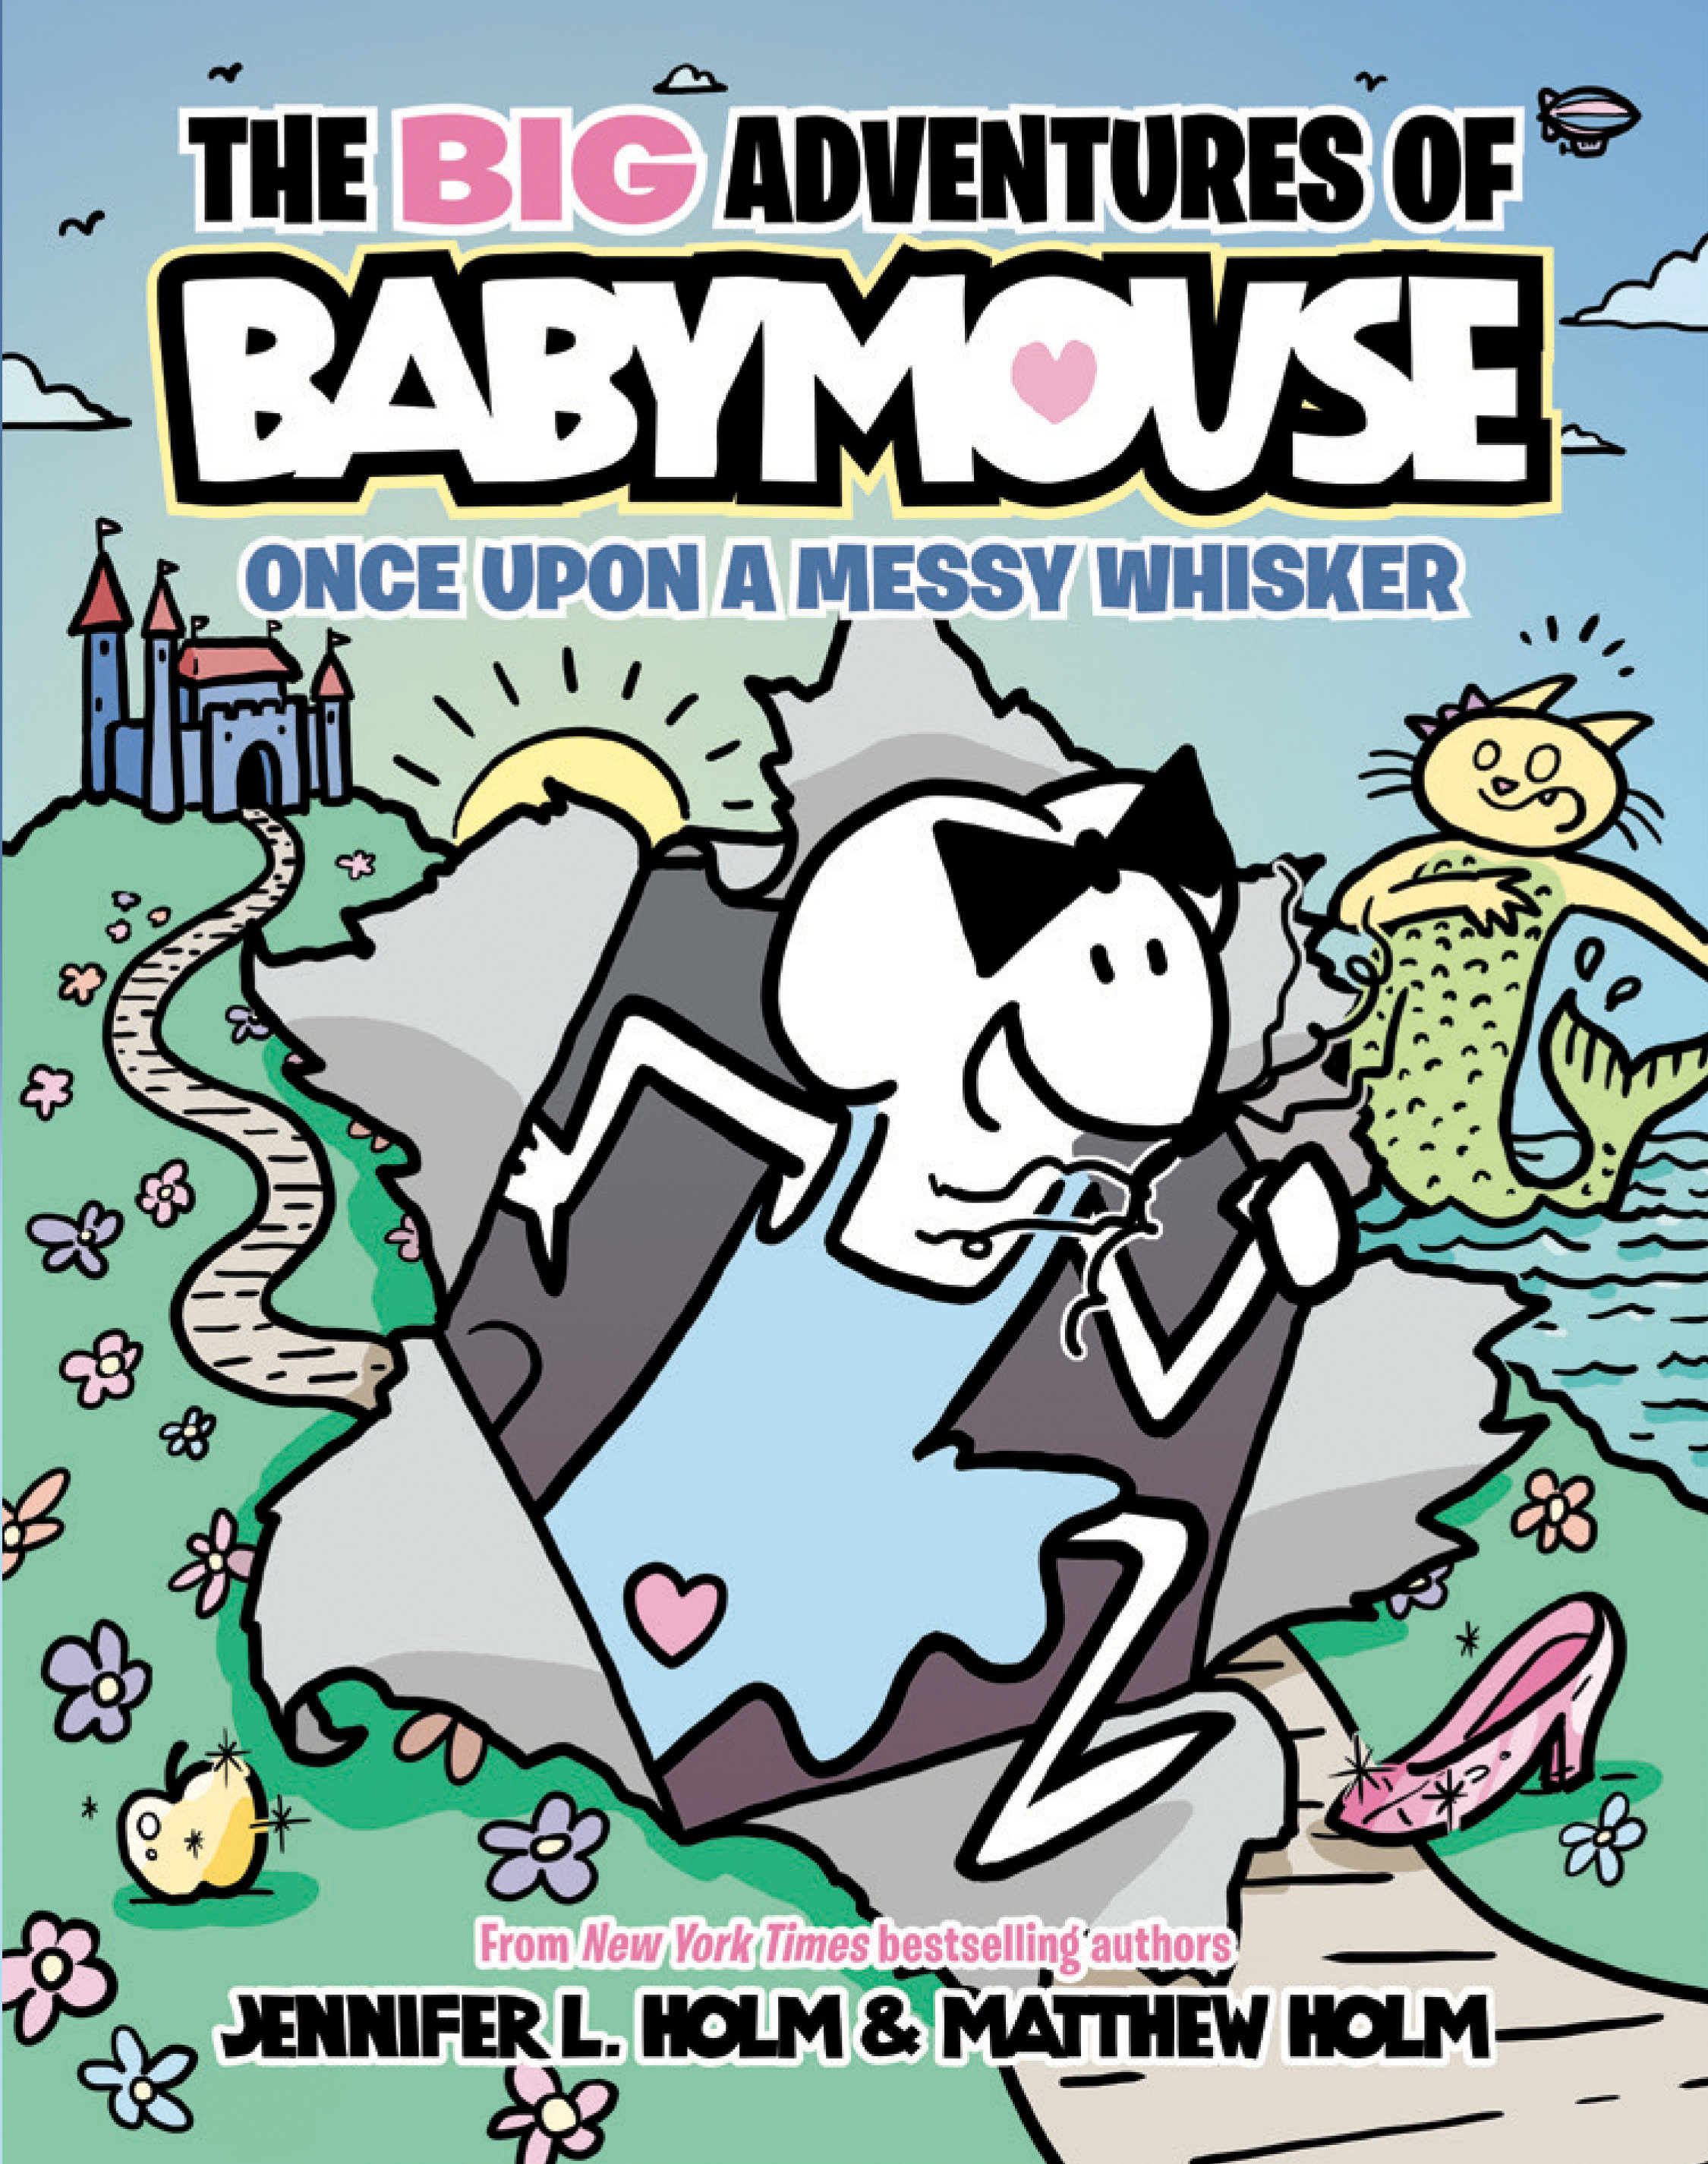 The Big Adventures of Babymouse Hardcover Graphic Novel Volume 1 Once Upon a Messy Whisker